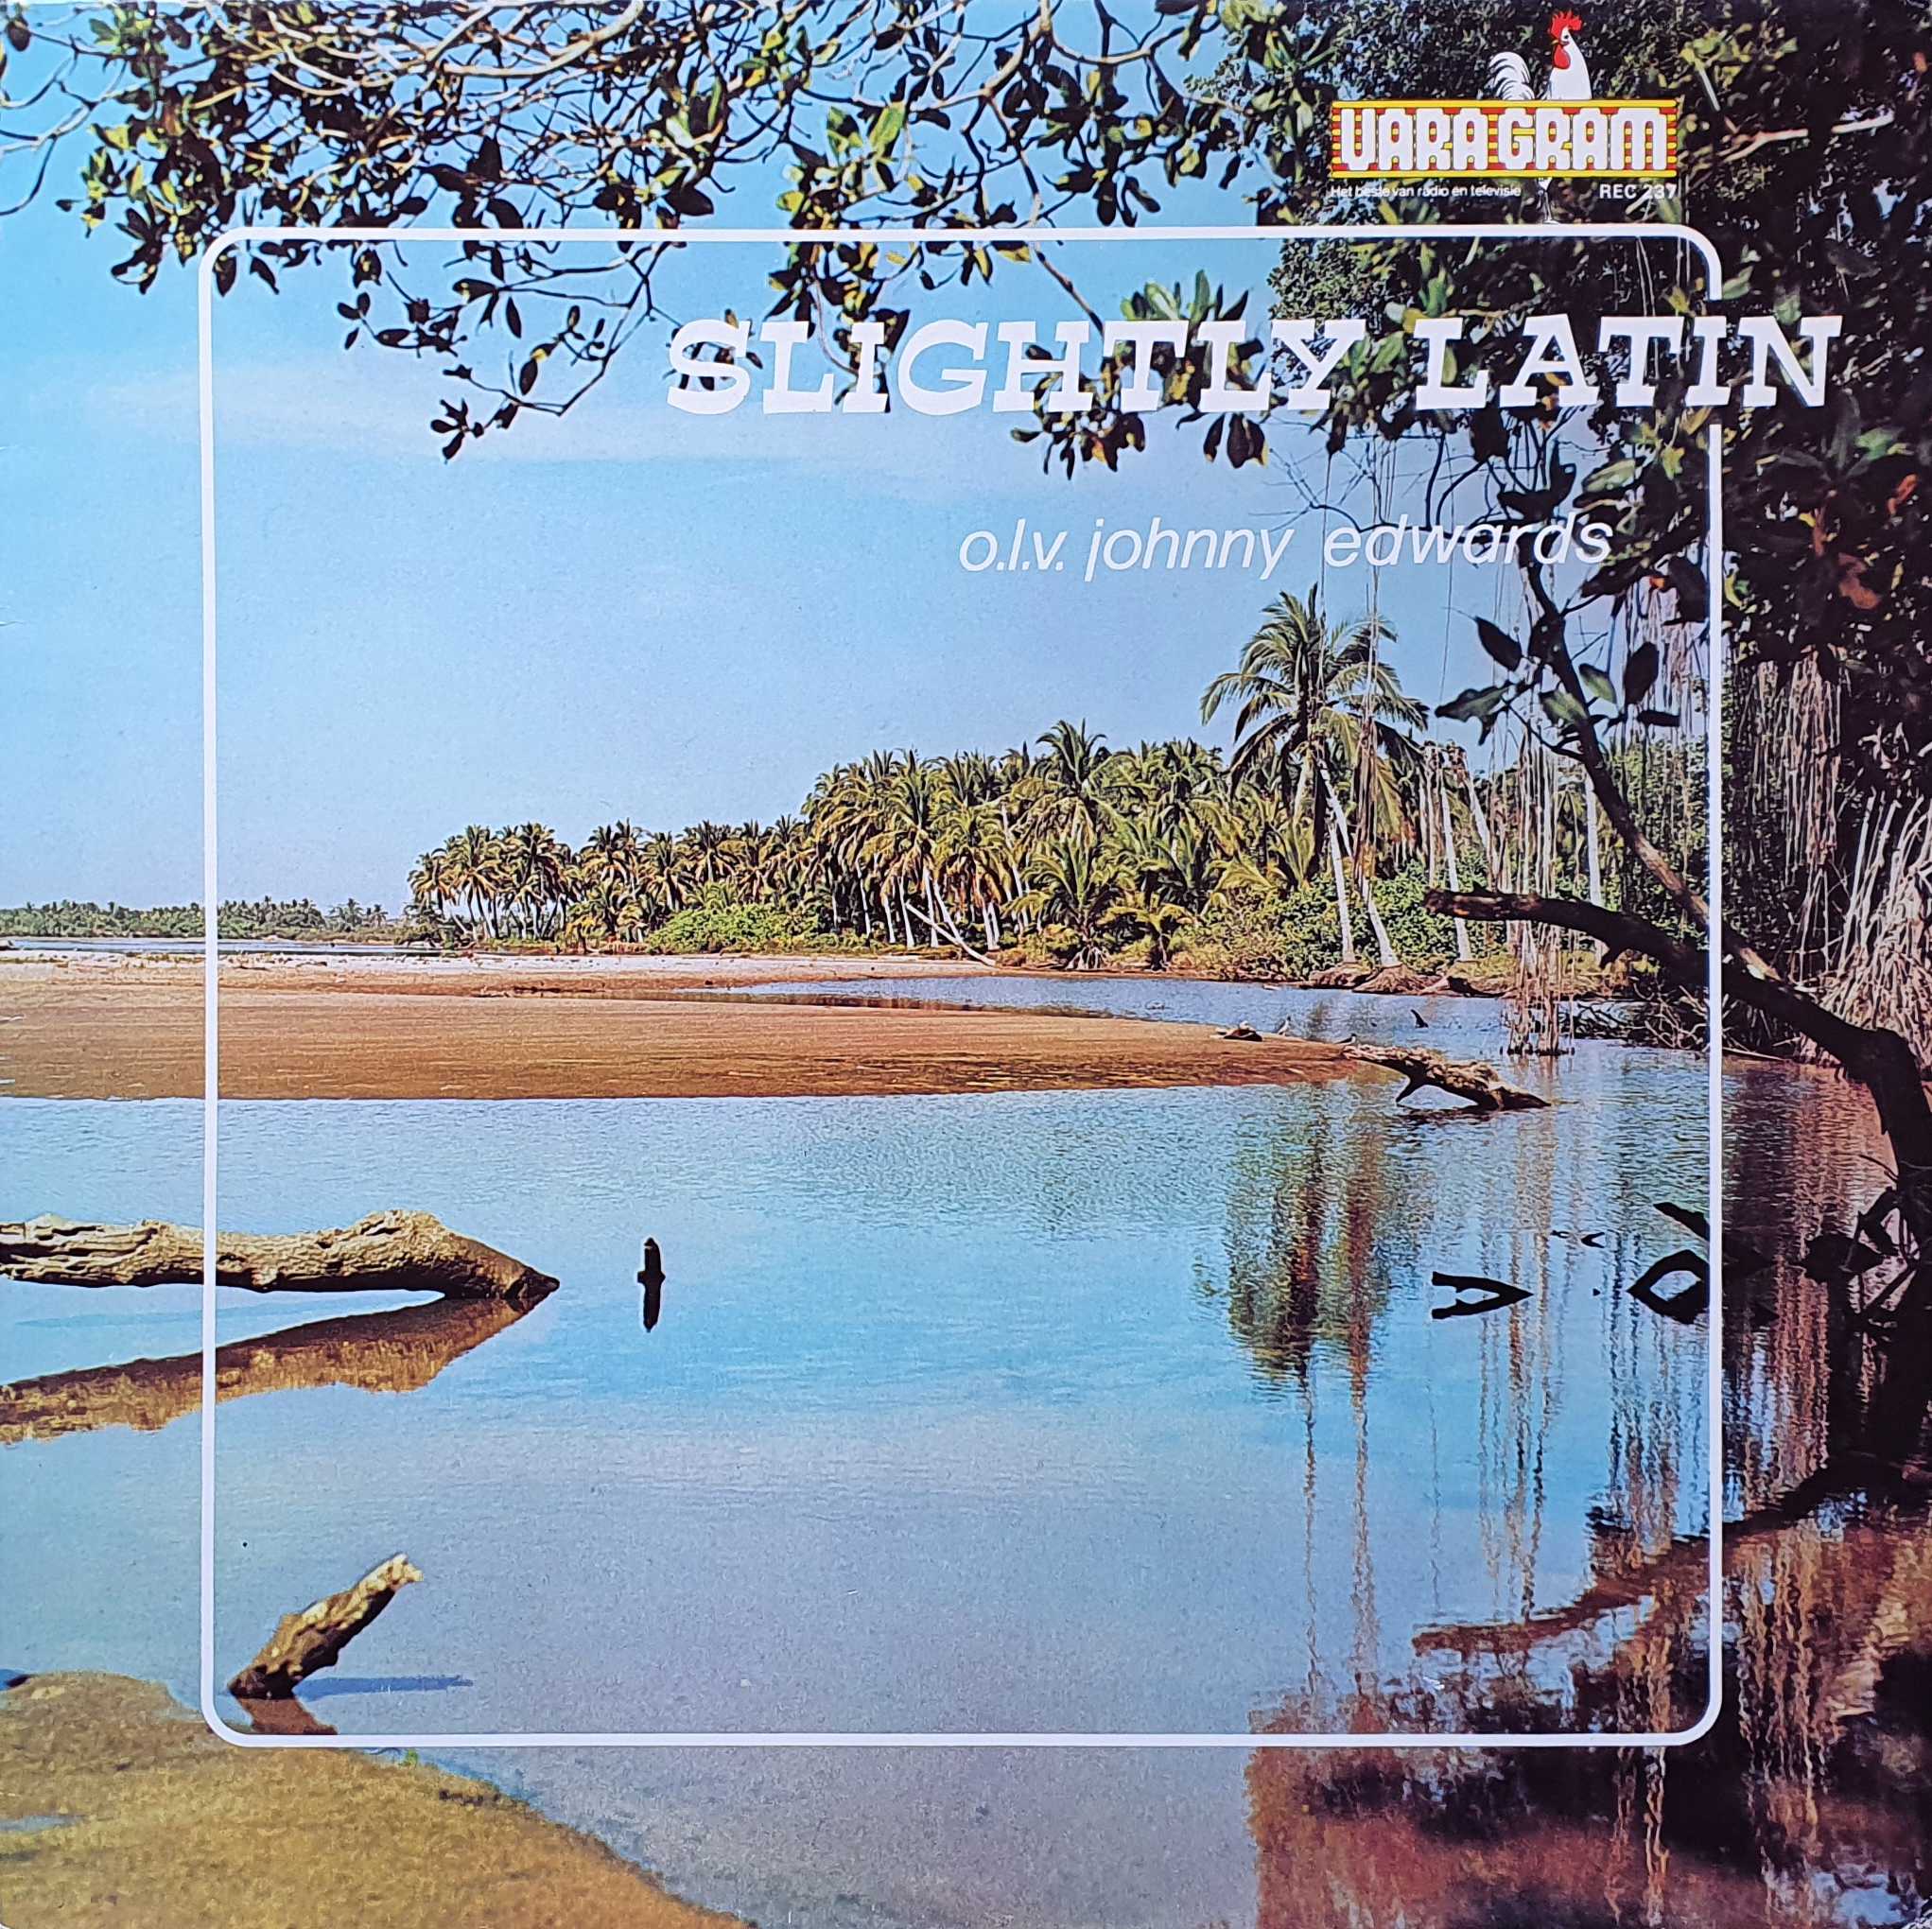 Picture of Slightly Latin by artist Various from the BBC albums - Records and Tapes library